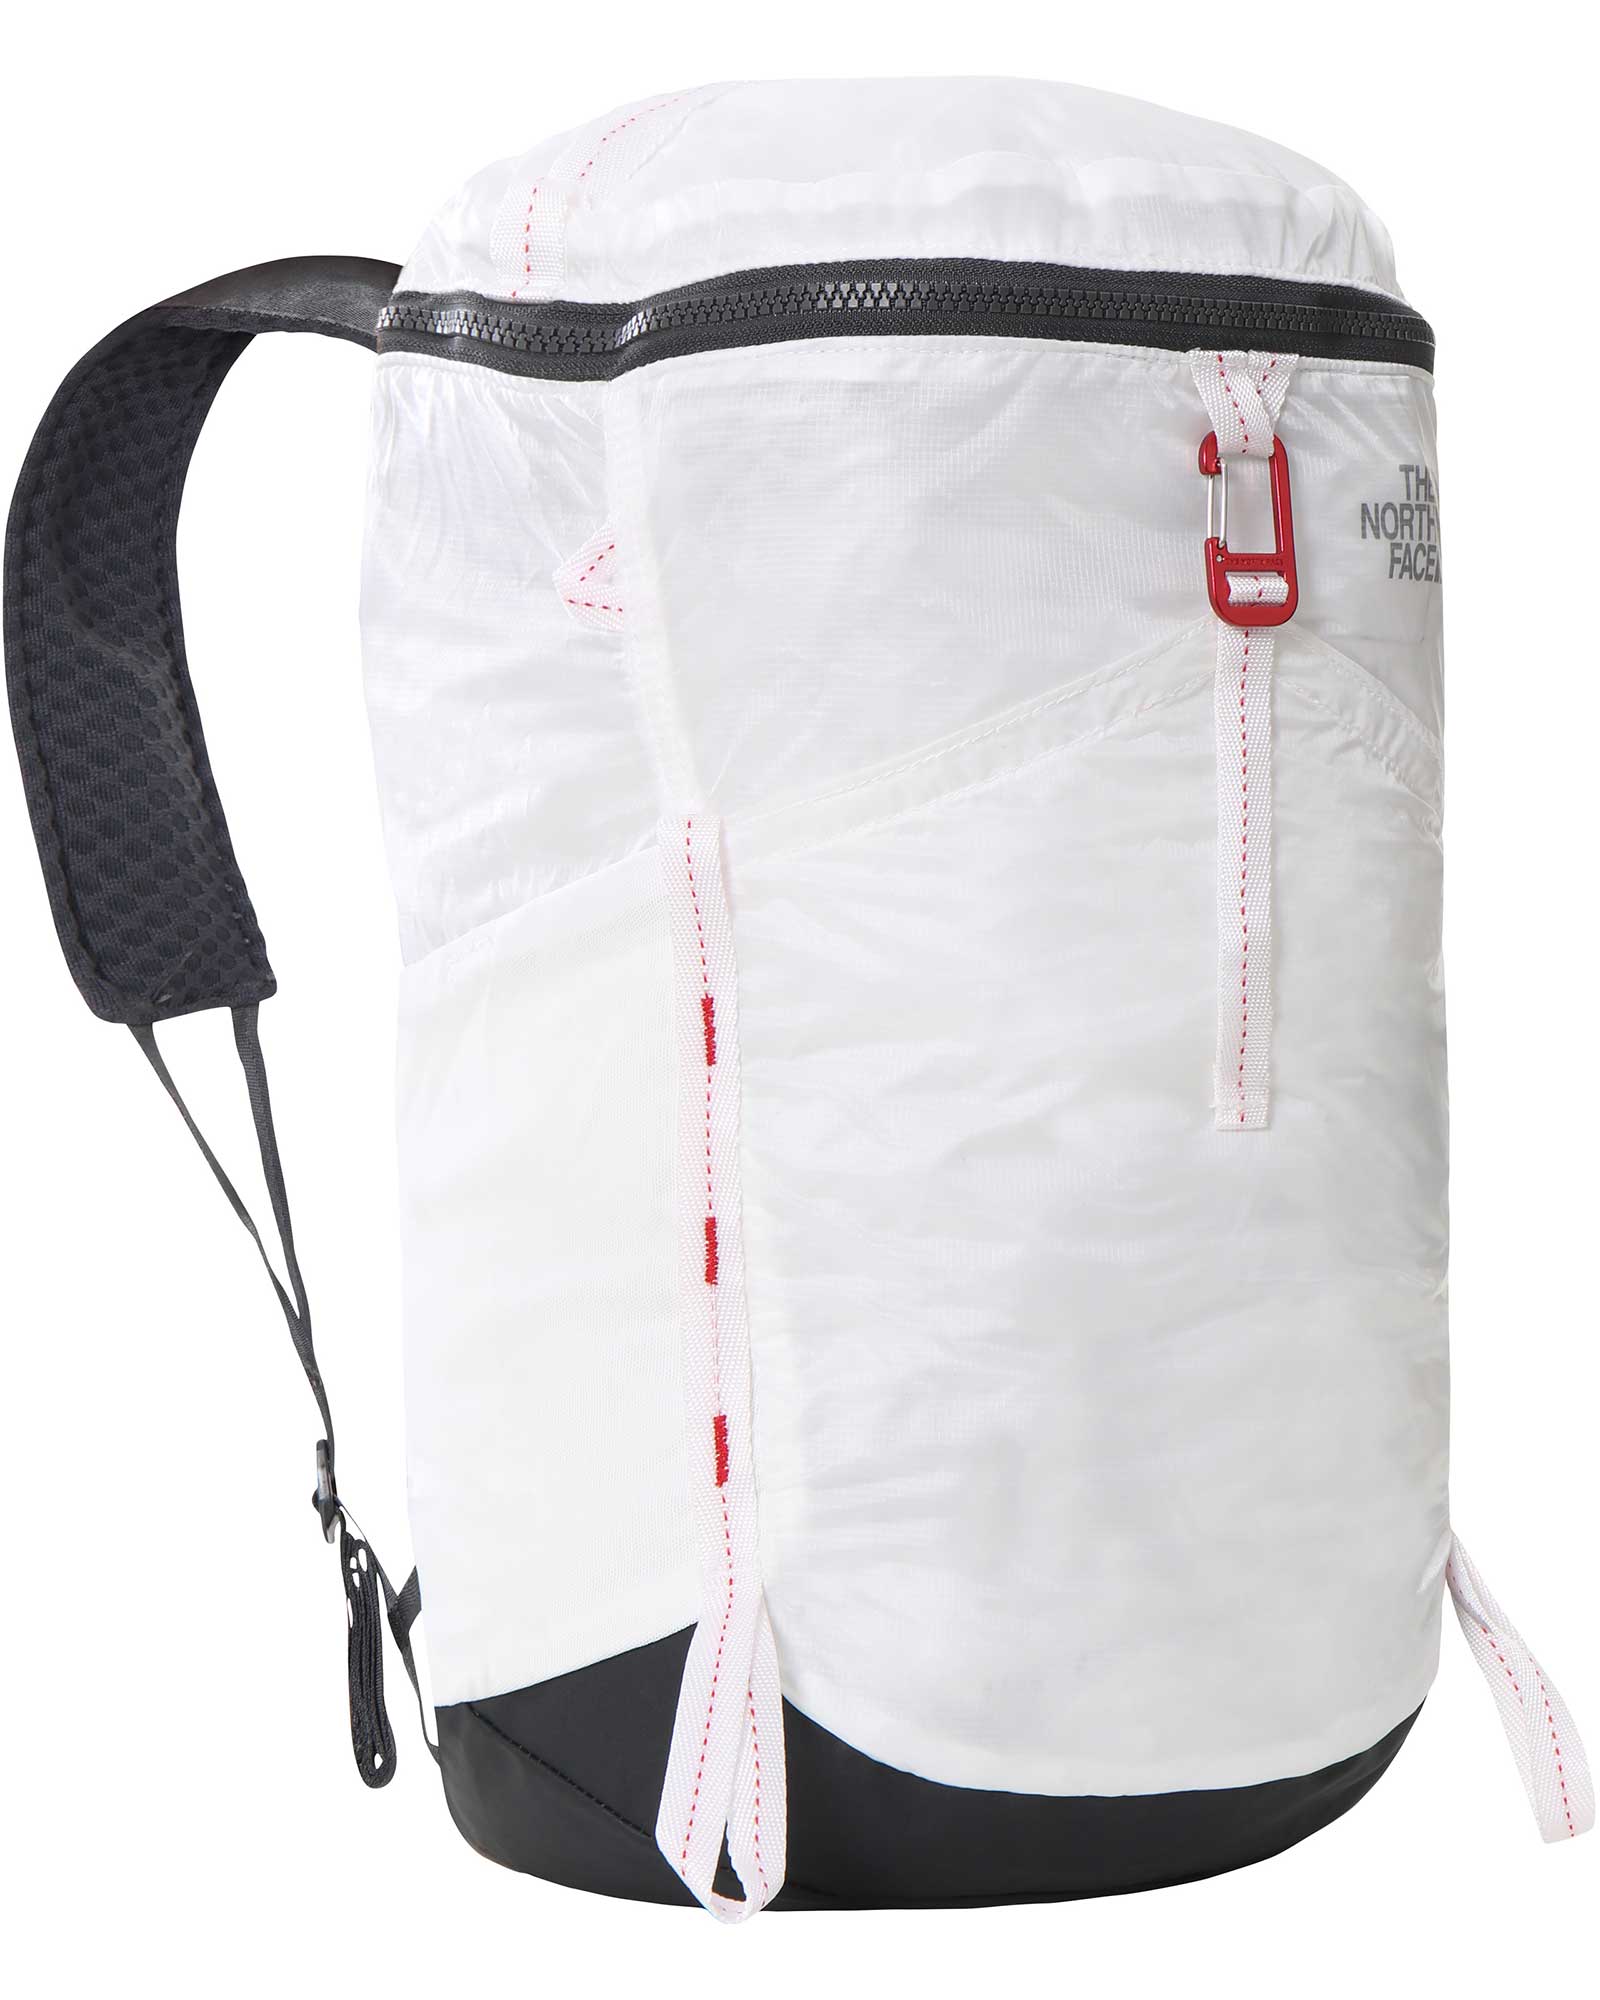 The North Face Flyweight Backpack - TNF White/Asphalt Grey/TNF Red